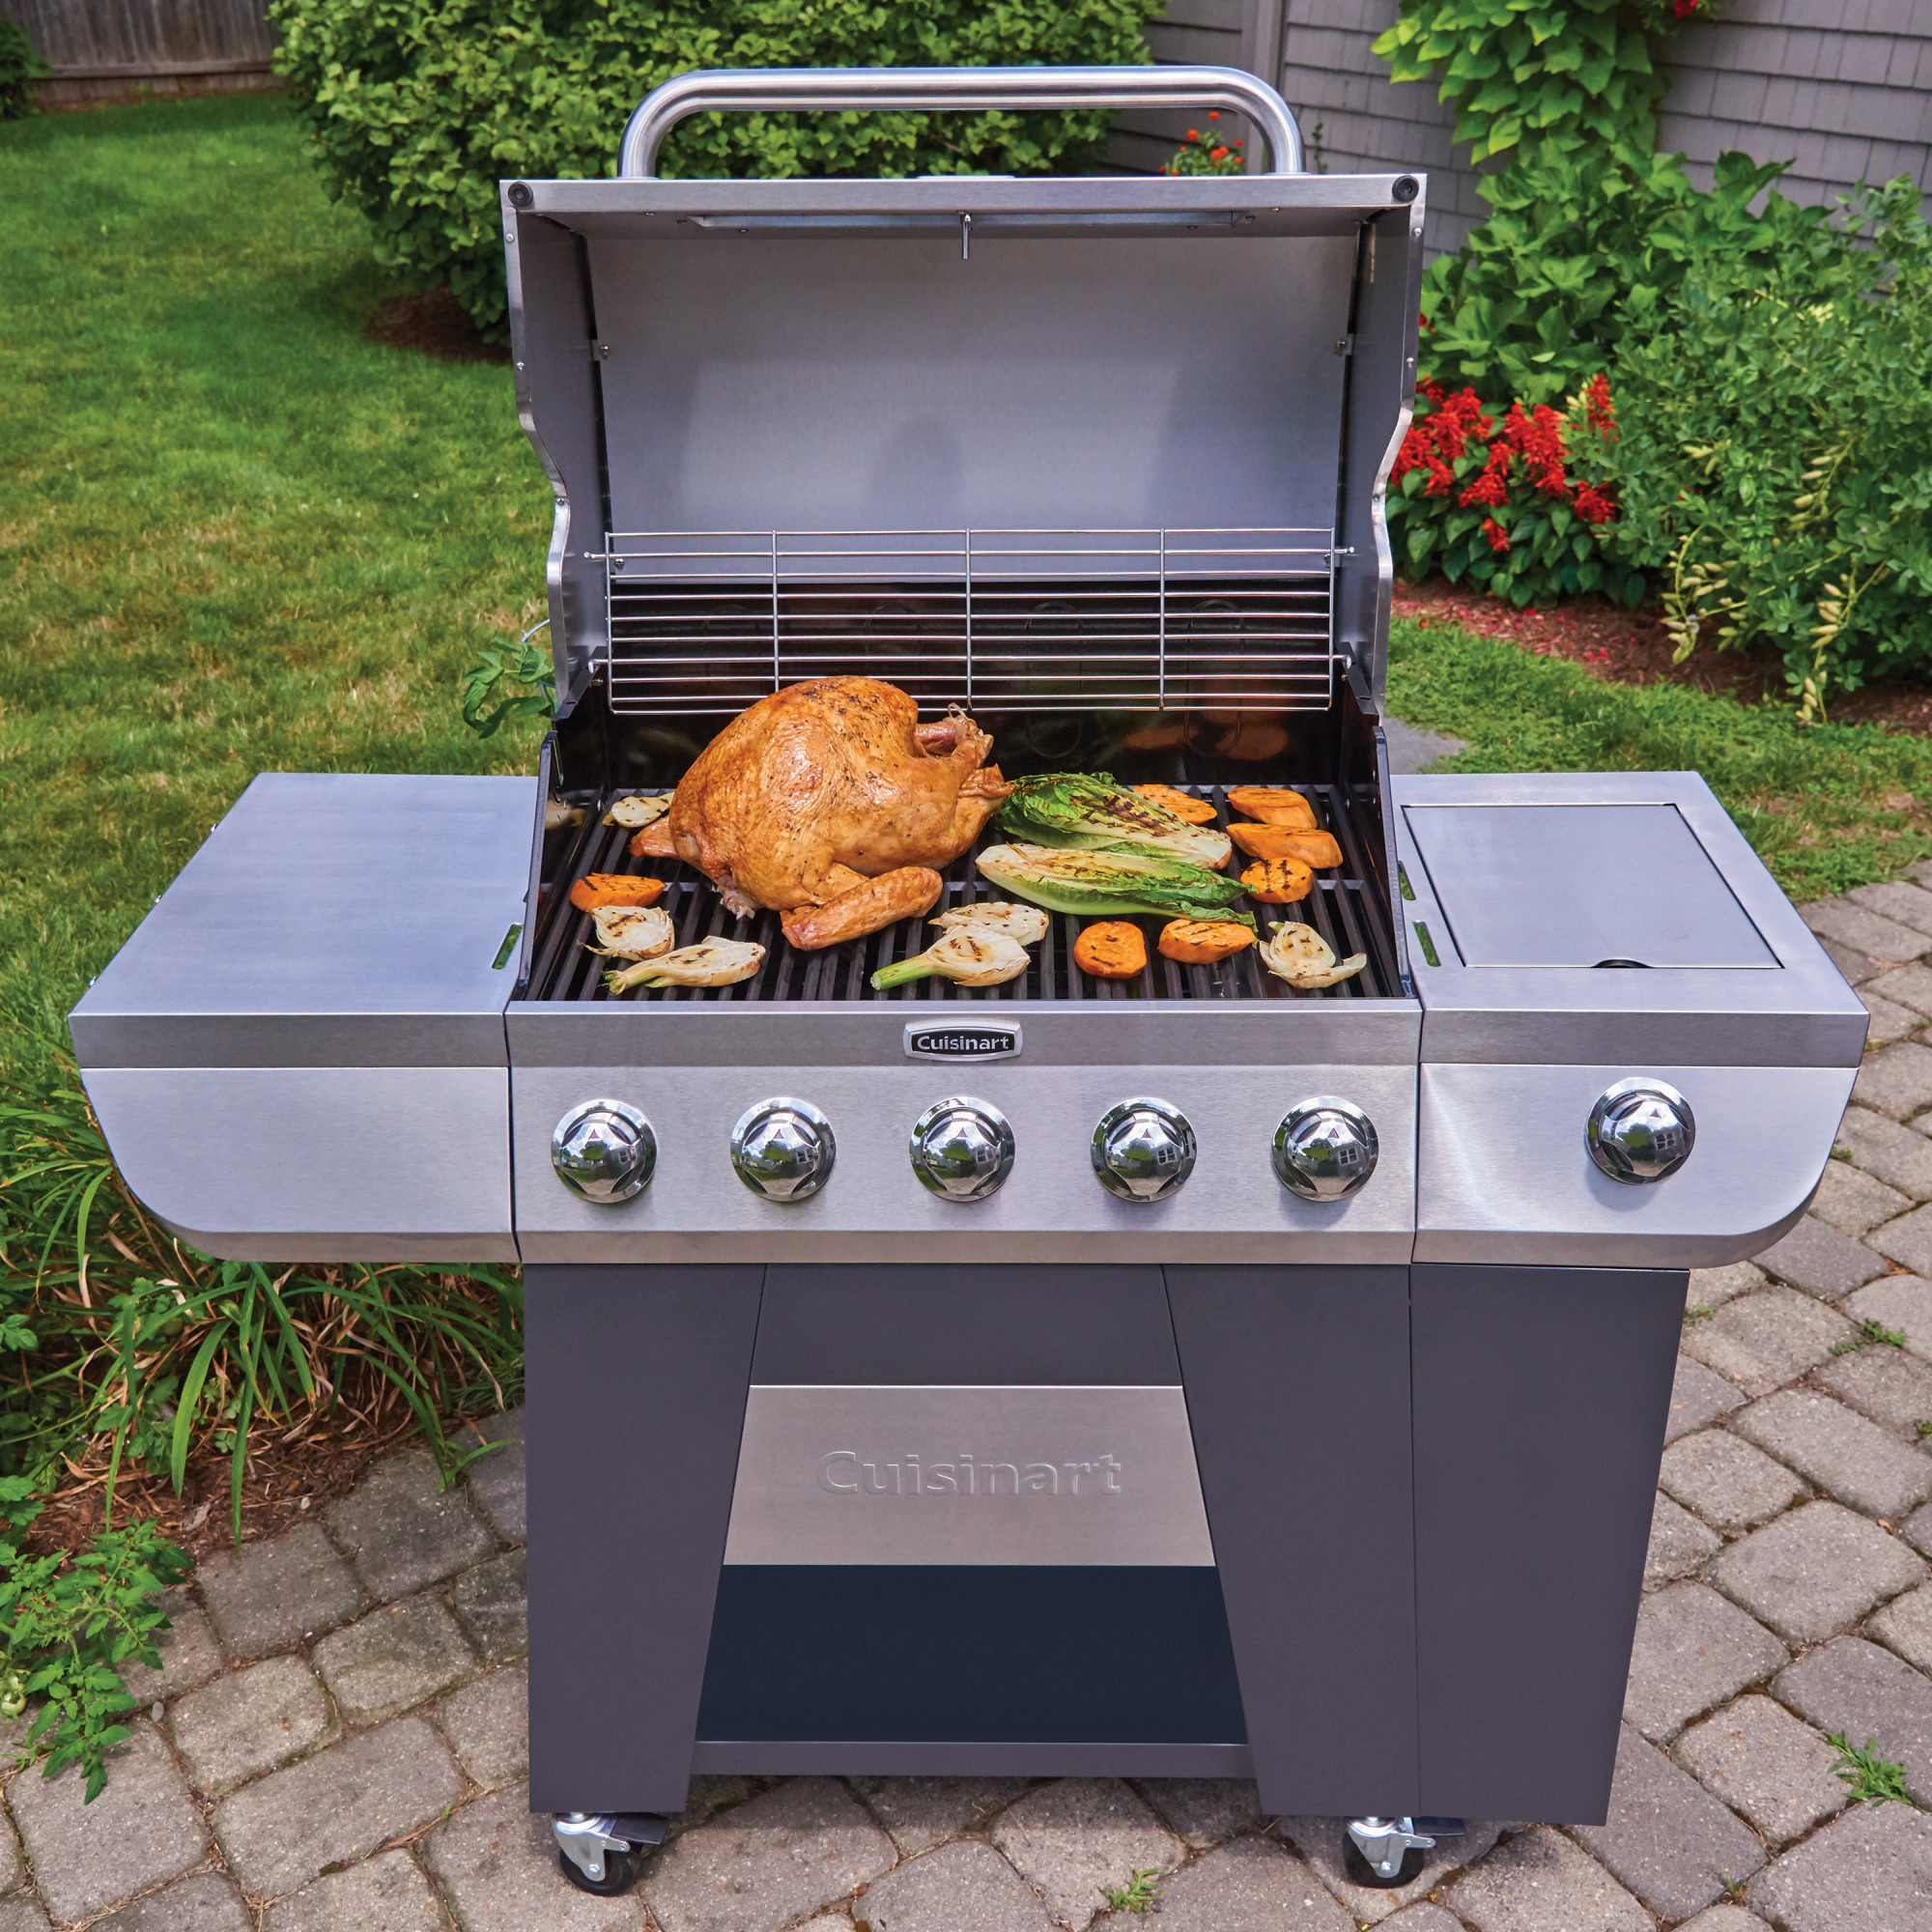 Cuisinart 3-In-1 Stainless Five-Burner Propane Gas Grill with Side Burner - image 3 of 14